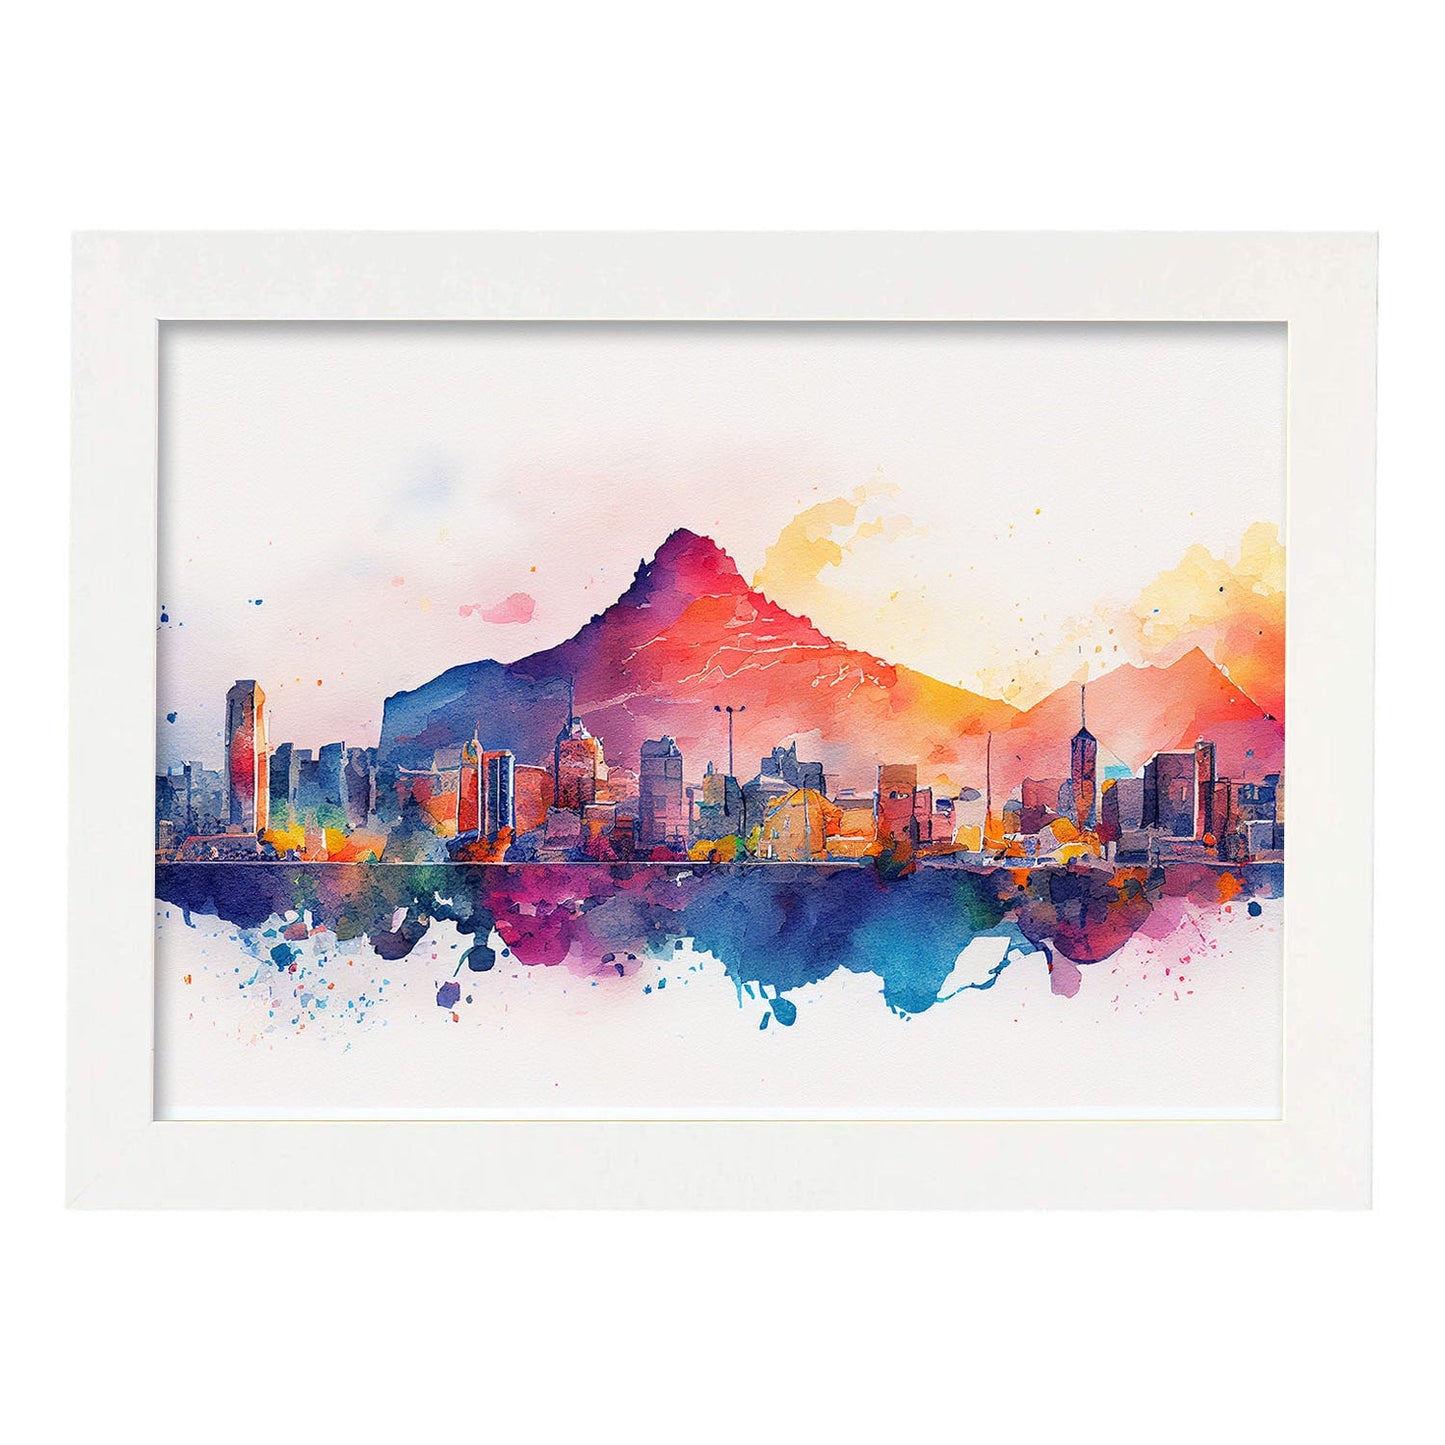 Nacnic watercolor of a skyline of the city of Cape Town_1. Aesthetic Wall Art Prints for Bedroom or Living Room Design.-Artwork-Nacnic-A4-Marco Blanco-Nacnic Estudio SL